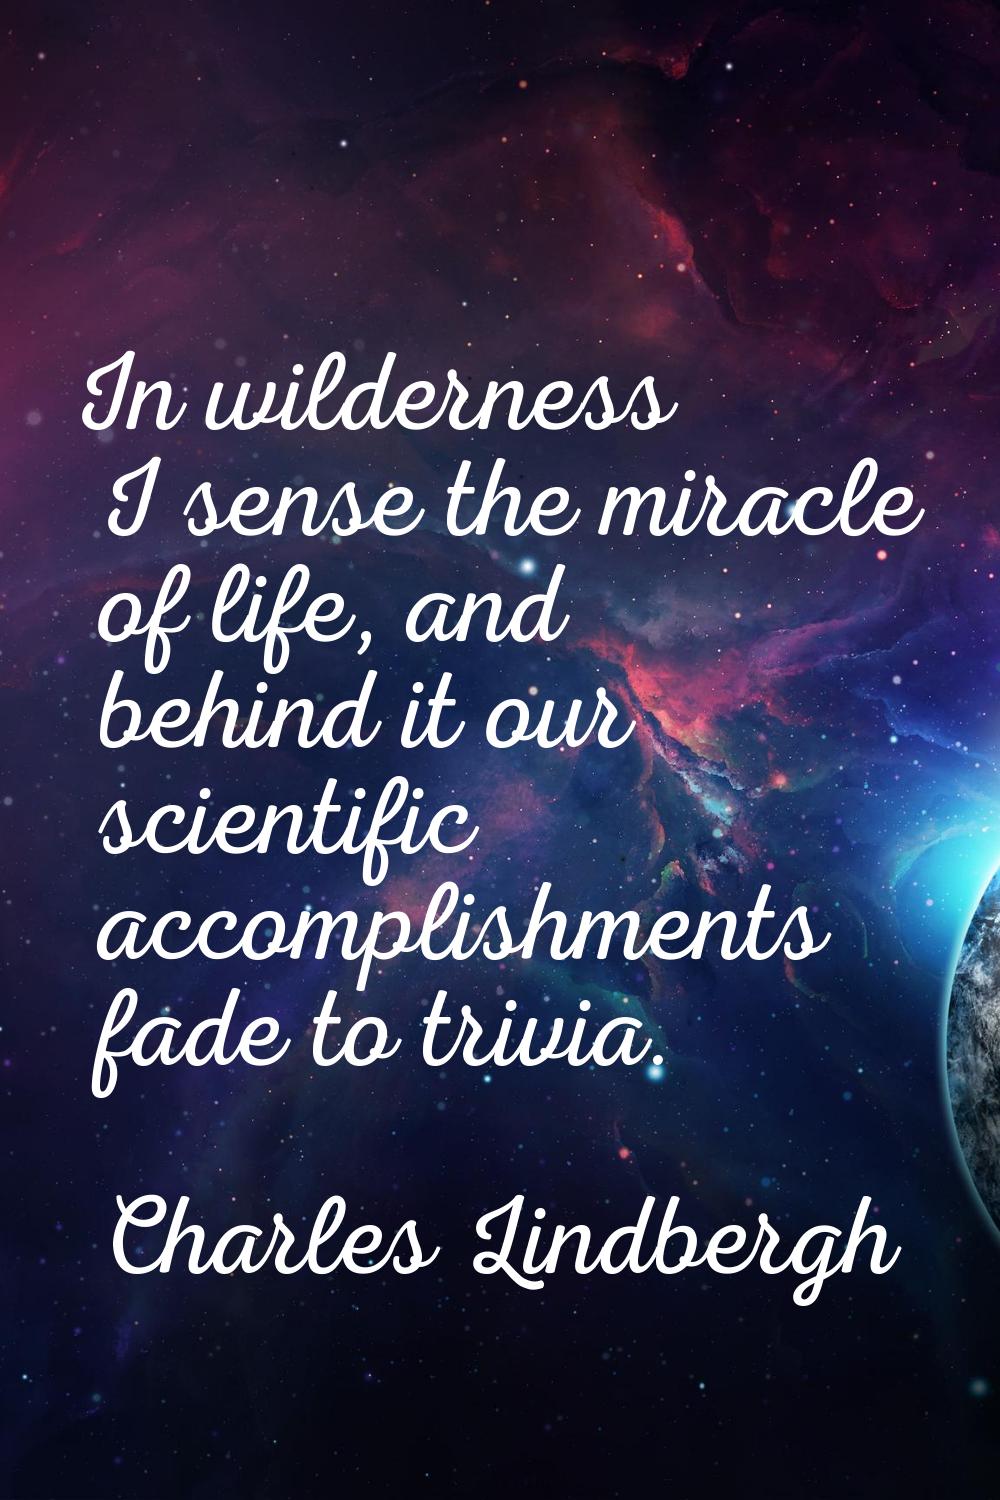 In wilderness I sense the miracle of life, and behind it our scientific accomplishments fade to tri